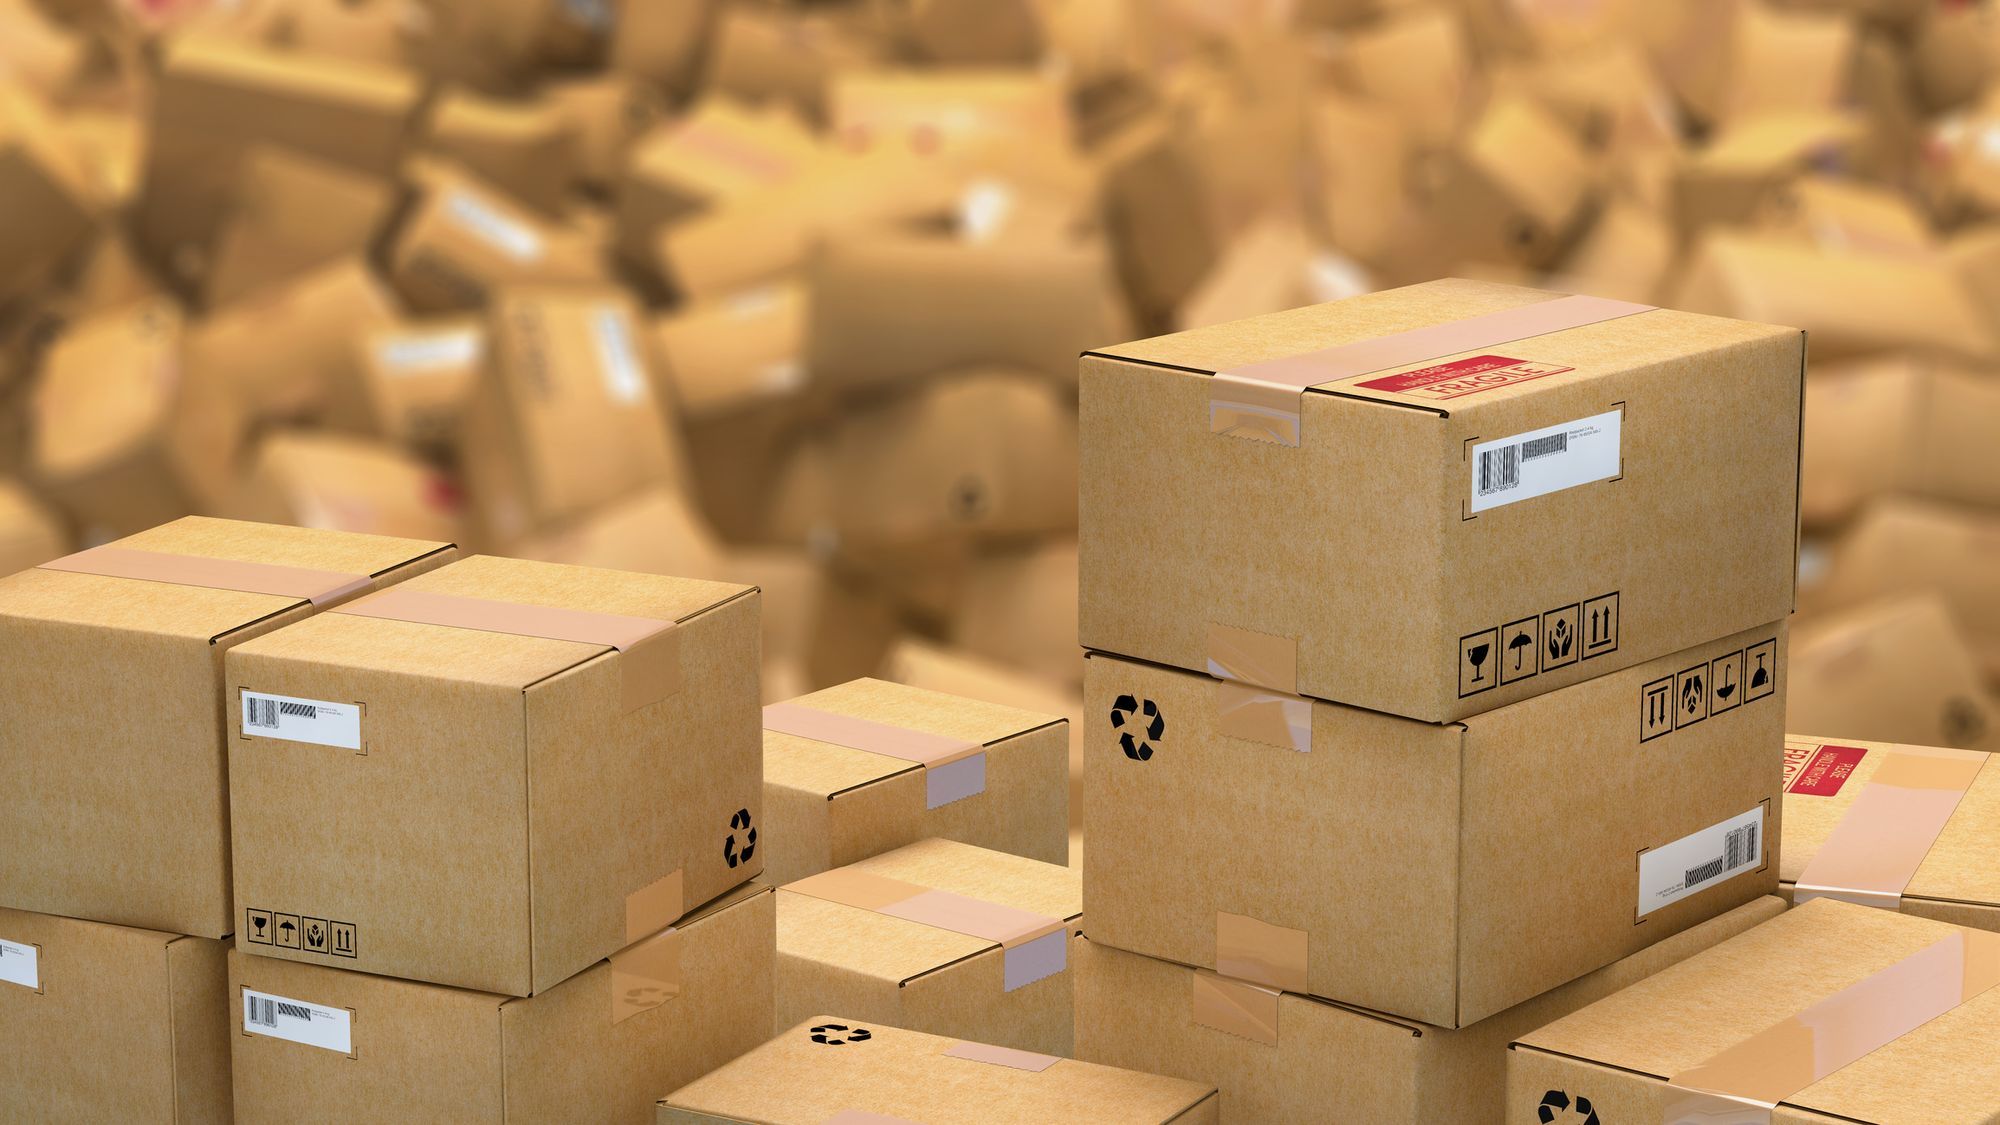 Inventories piling up in a warehouse